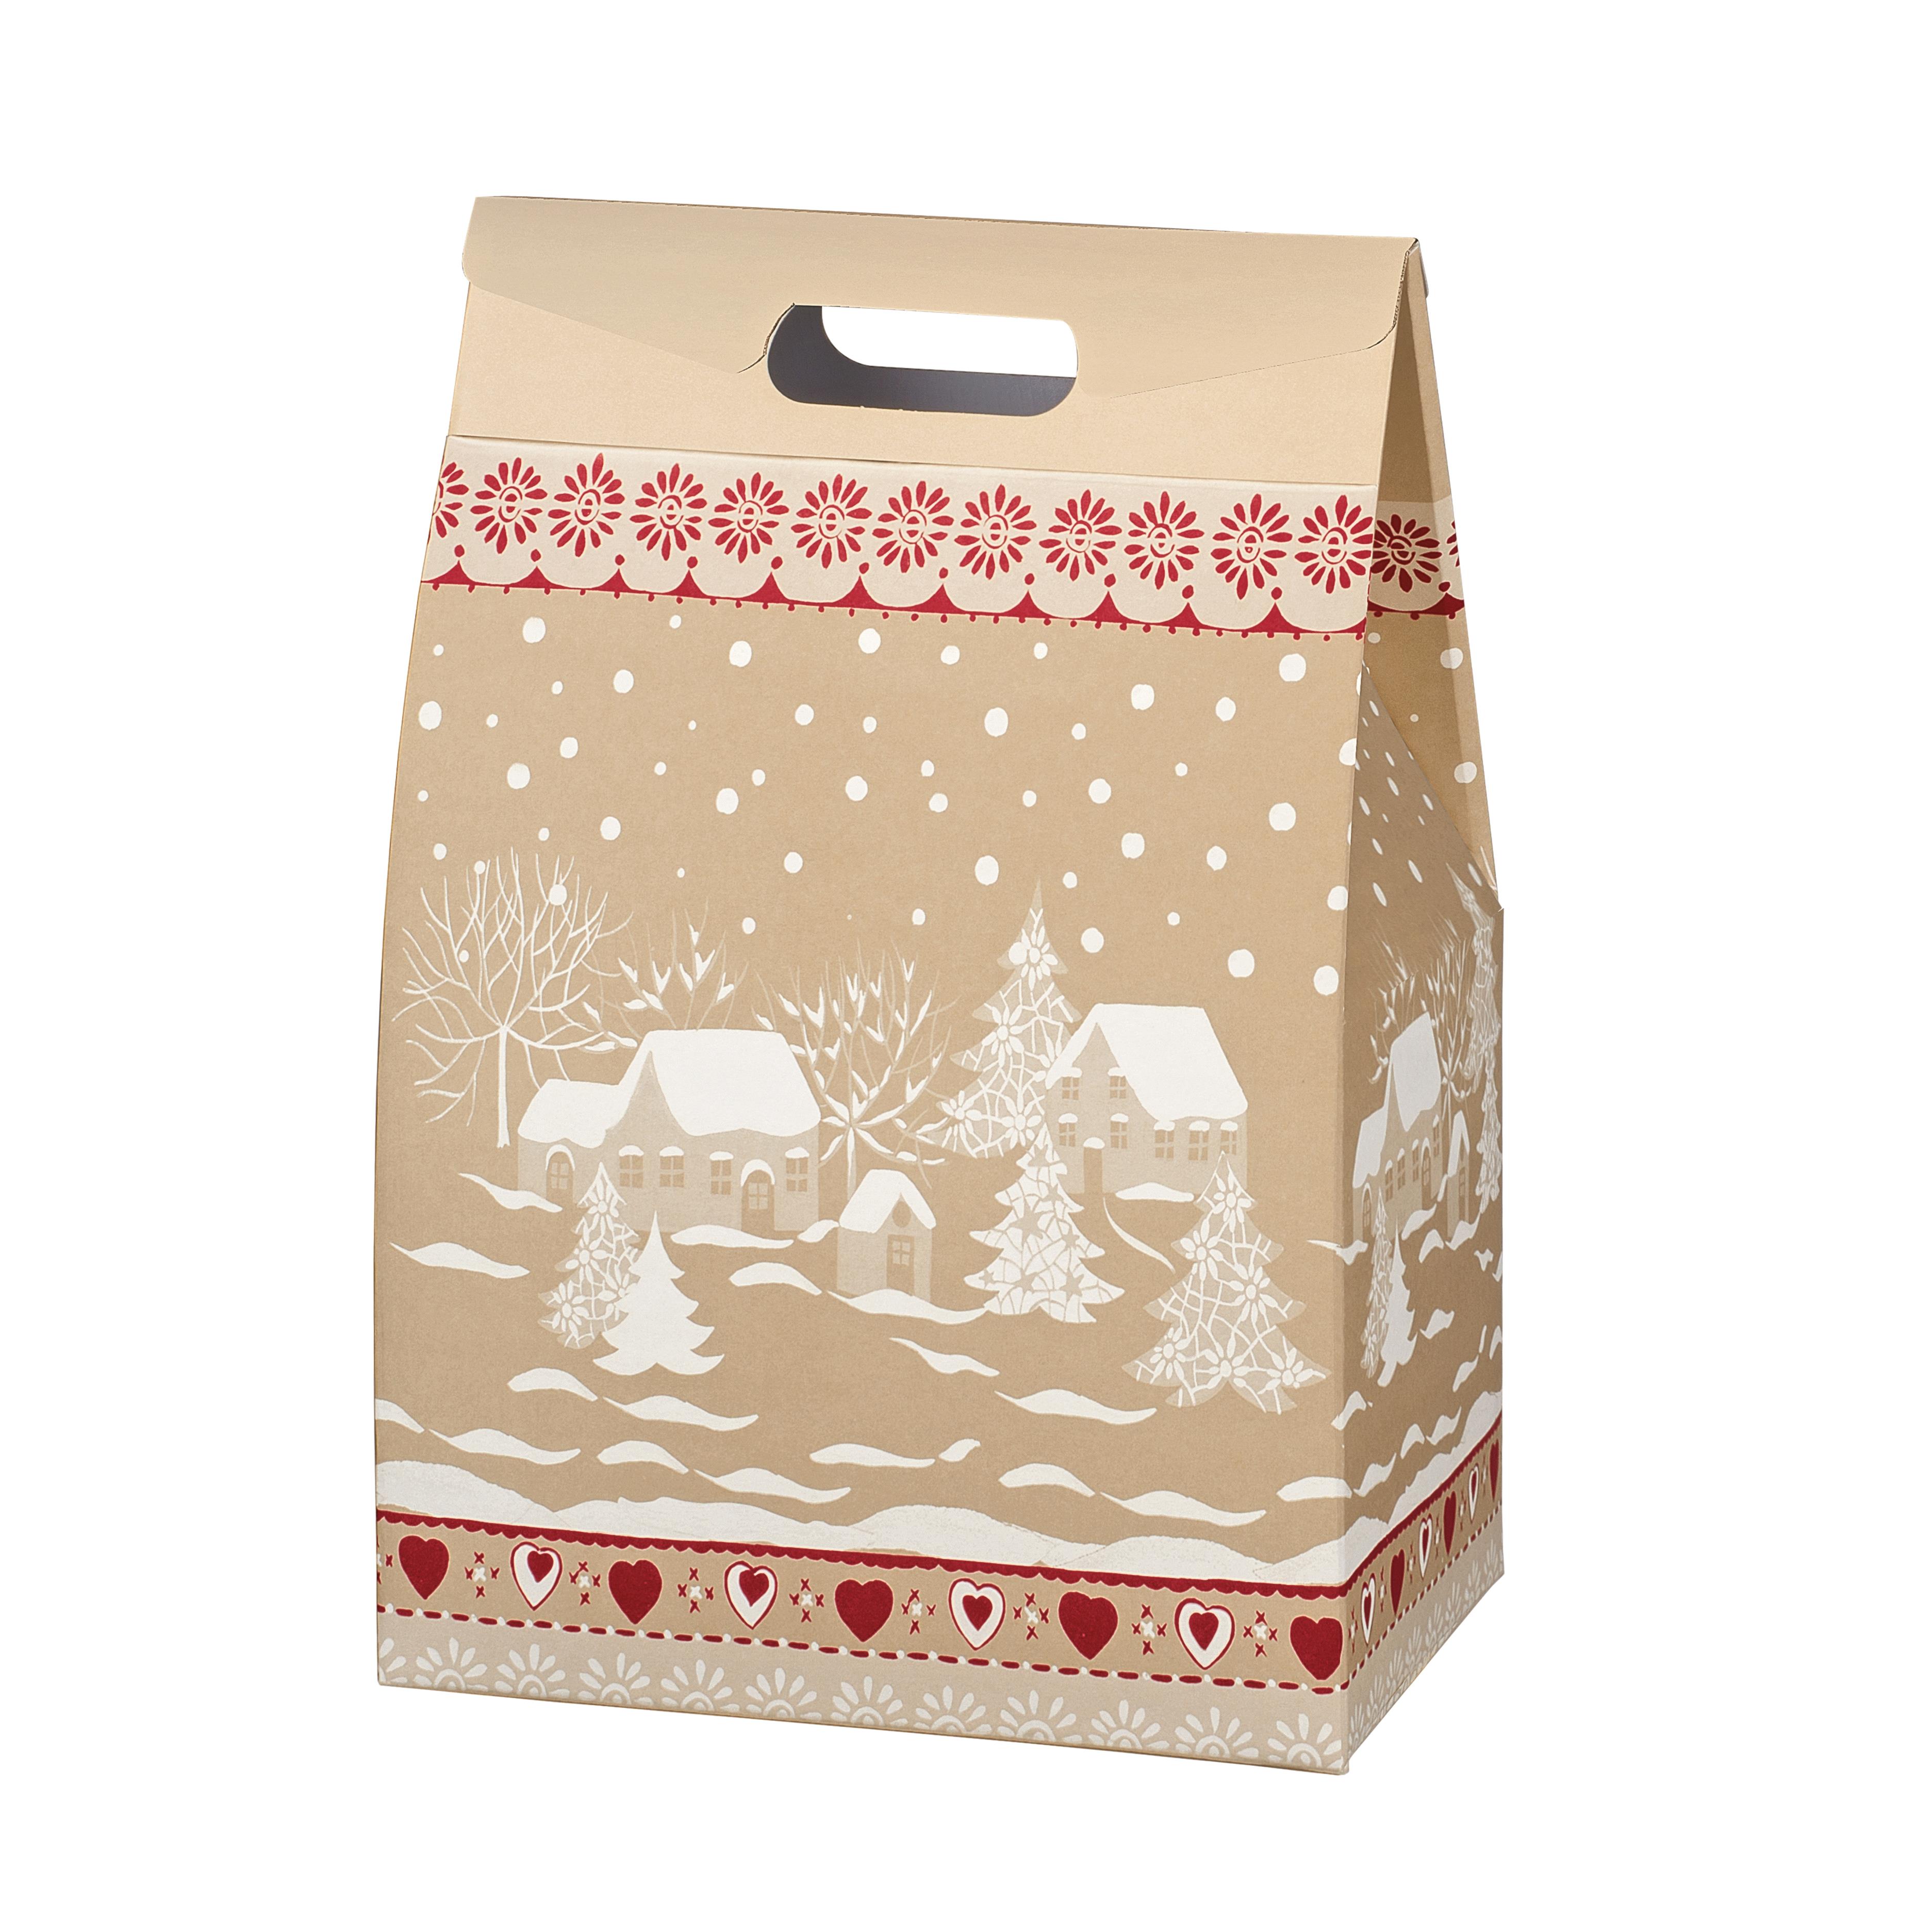 CHRISTMAS ITEMS, BOXES, BASKETS,DISHES, VARIOUS BAGS AND CONTAINERS, BAULOTTO 280X200X410 BORGO